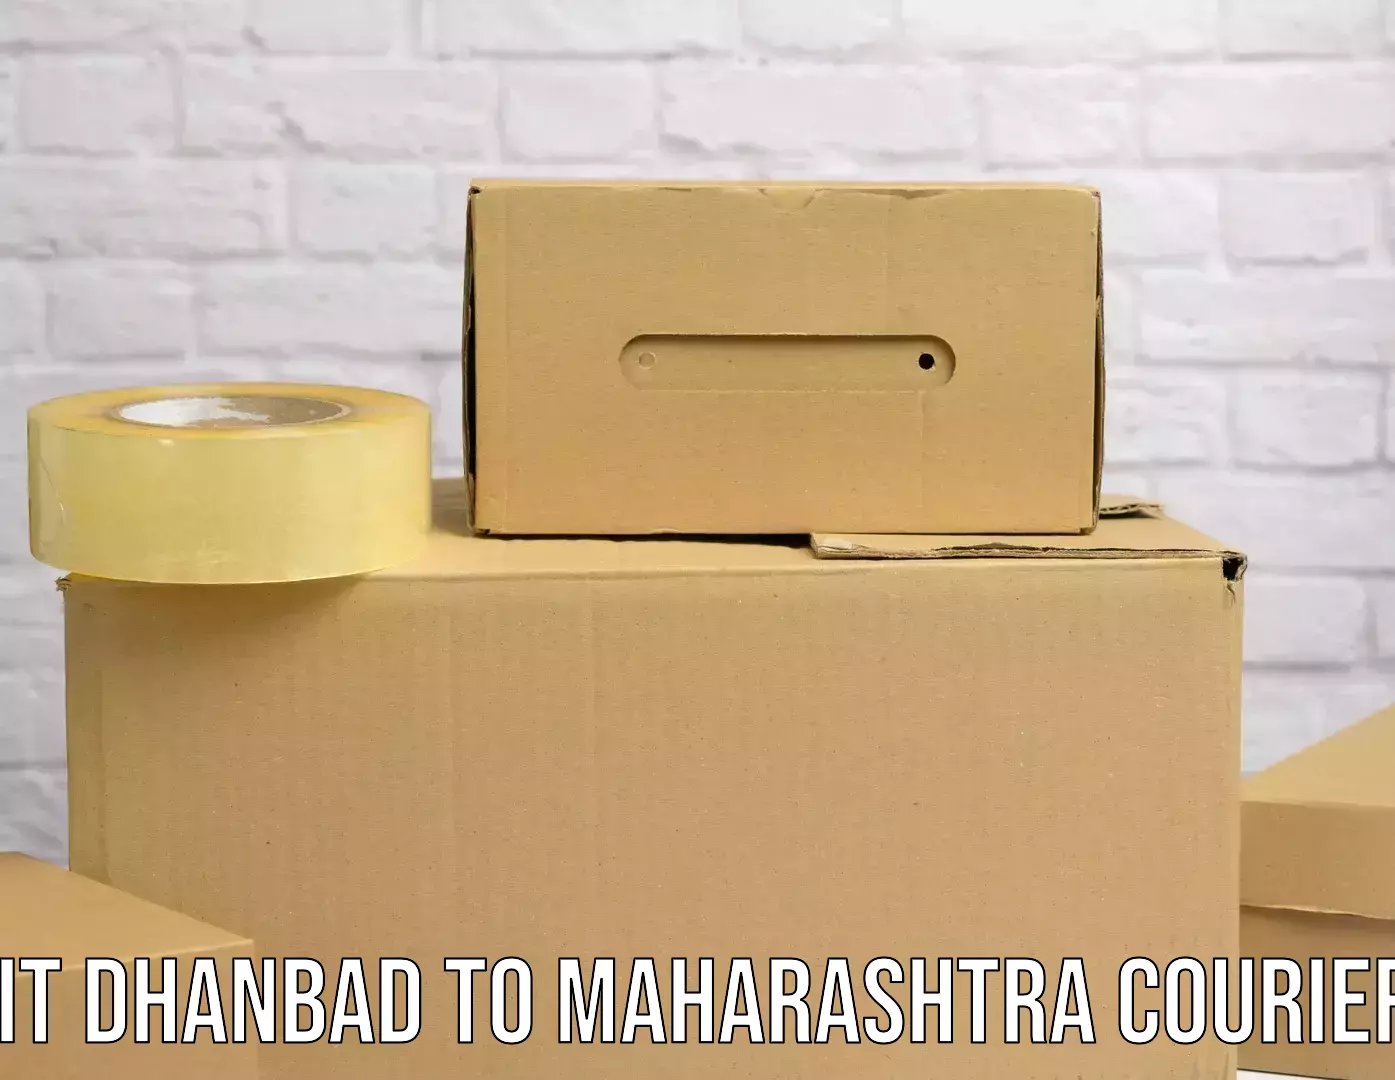 Affordable parcel service IIT Dhanbad to Loni Ahmednagar